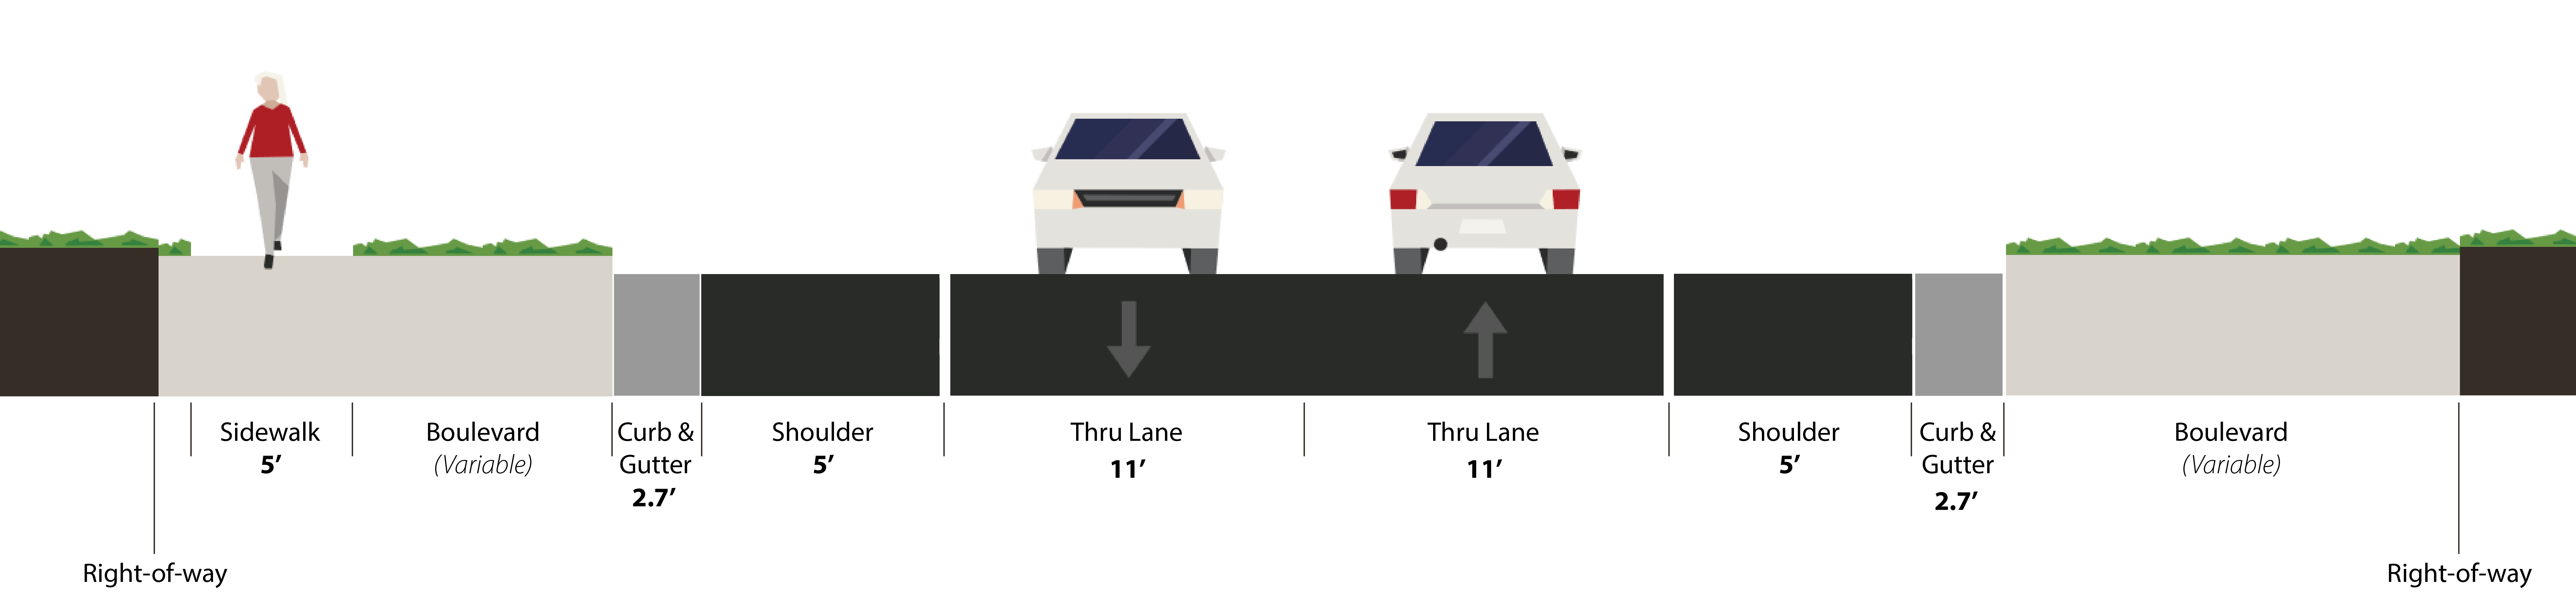 Option with Shoulders: 5 foot sidewalk, variable width boulevard, 2.7 foot curb and gutter, 5 foot shoulder, 11 foot thru lane, 11 foot thru lane, 5 foot shoulder, 2.7 foot curb and gutter, variable width boulevard.